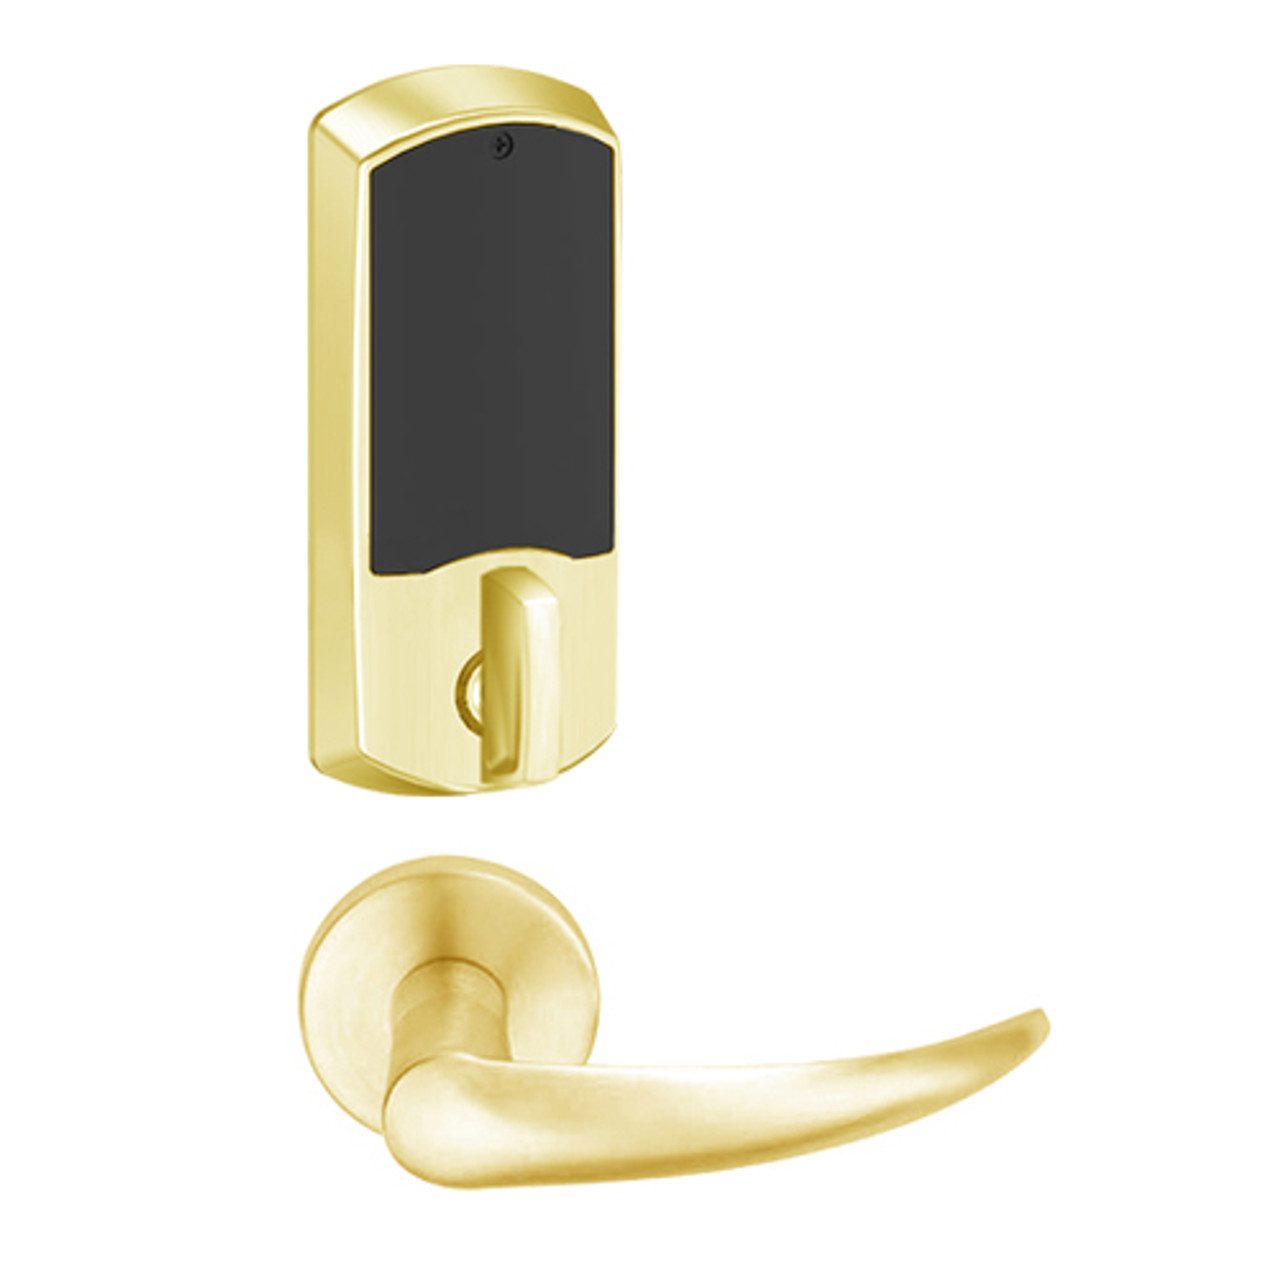 LEMD-GRW-J-OME-605-00B Schlage Privacy/Apartment Wireless Greenwich Mortise Deadbolt Lock with LED and Omega Lever Prepped for FSIC in Bright Brass